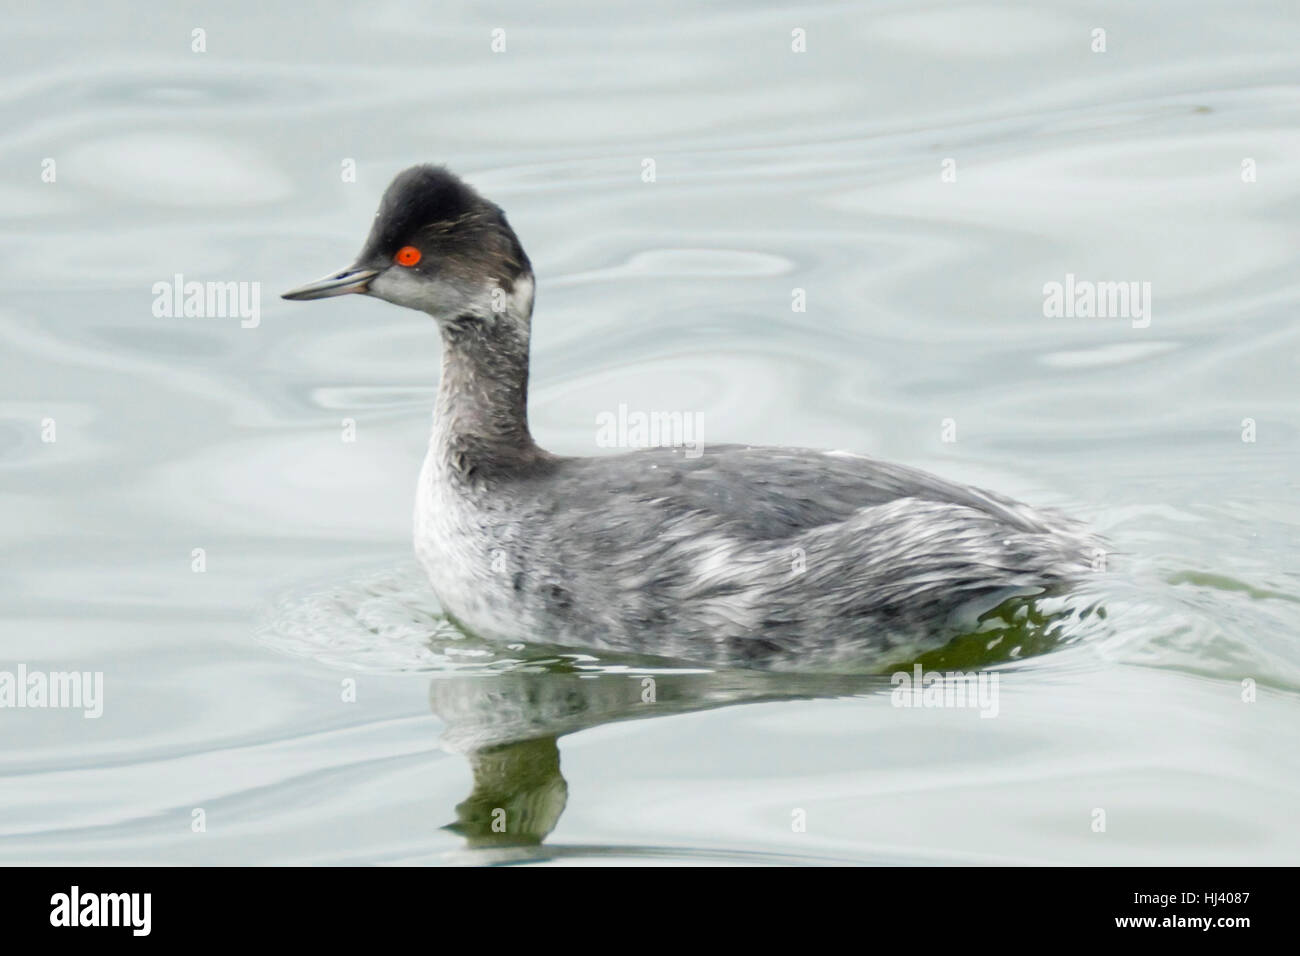 Eared Grebe waterbird in winter plumage paddling on pond. Stock Photo